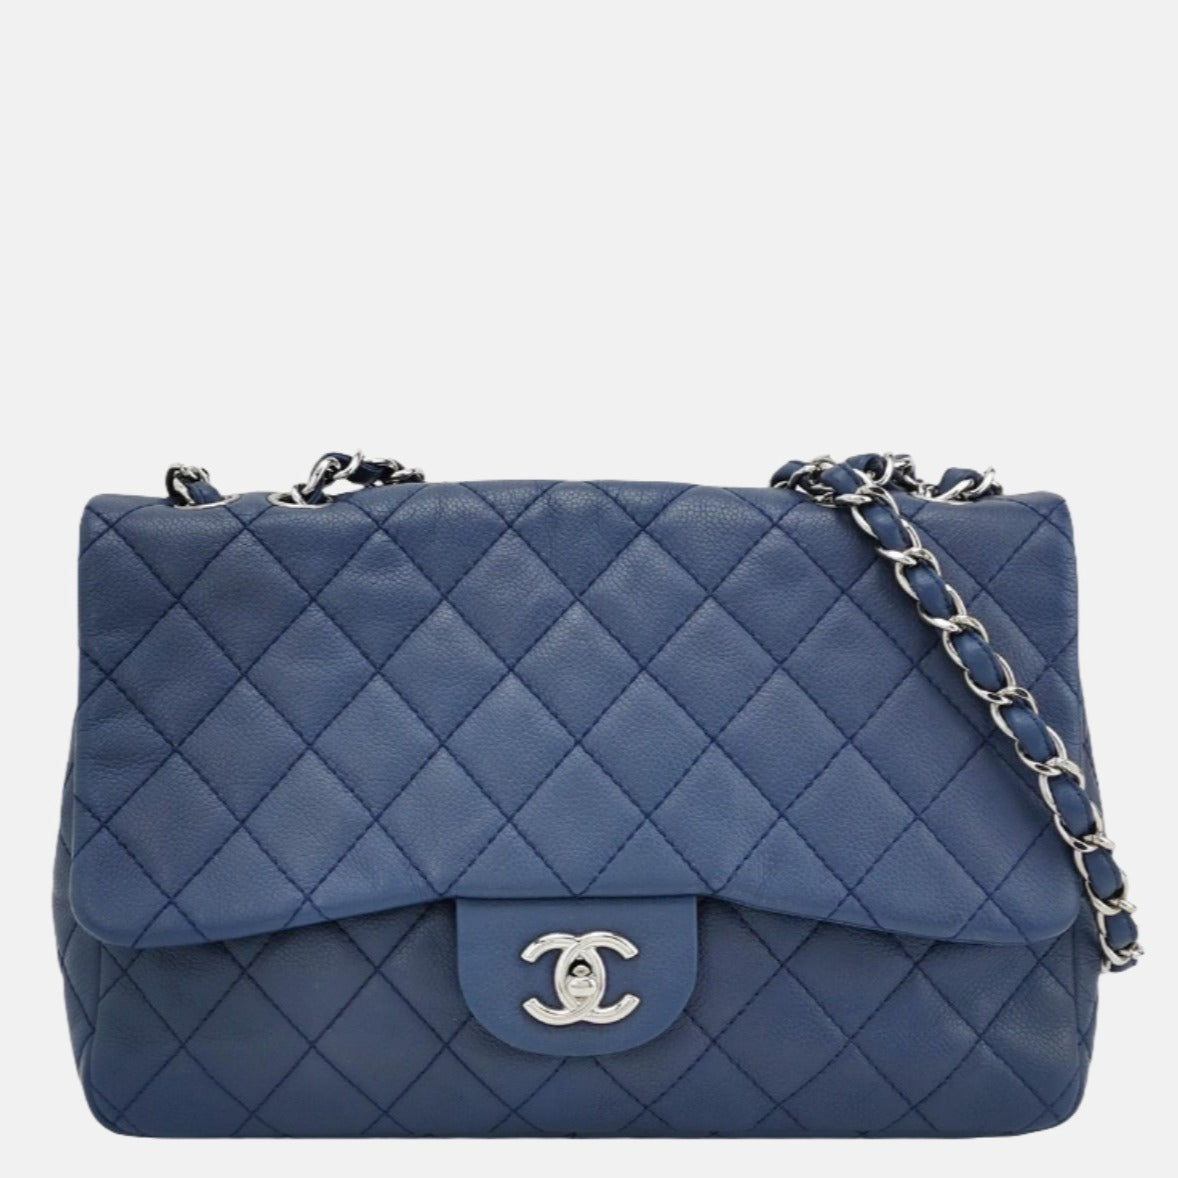 Chanel Classic Flap Large Navy Blue Caviar Leather Silver-tone Hardware-Luxbags